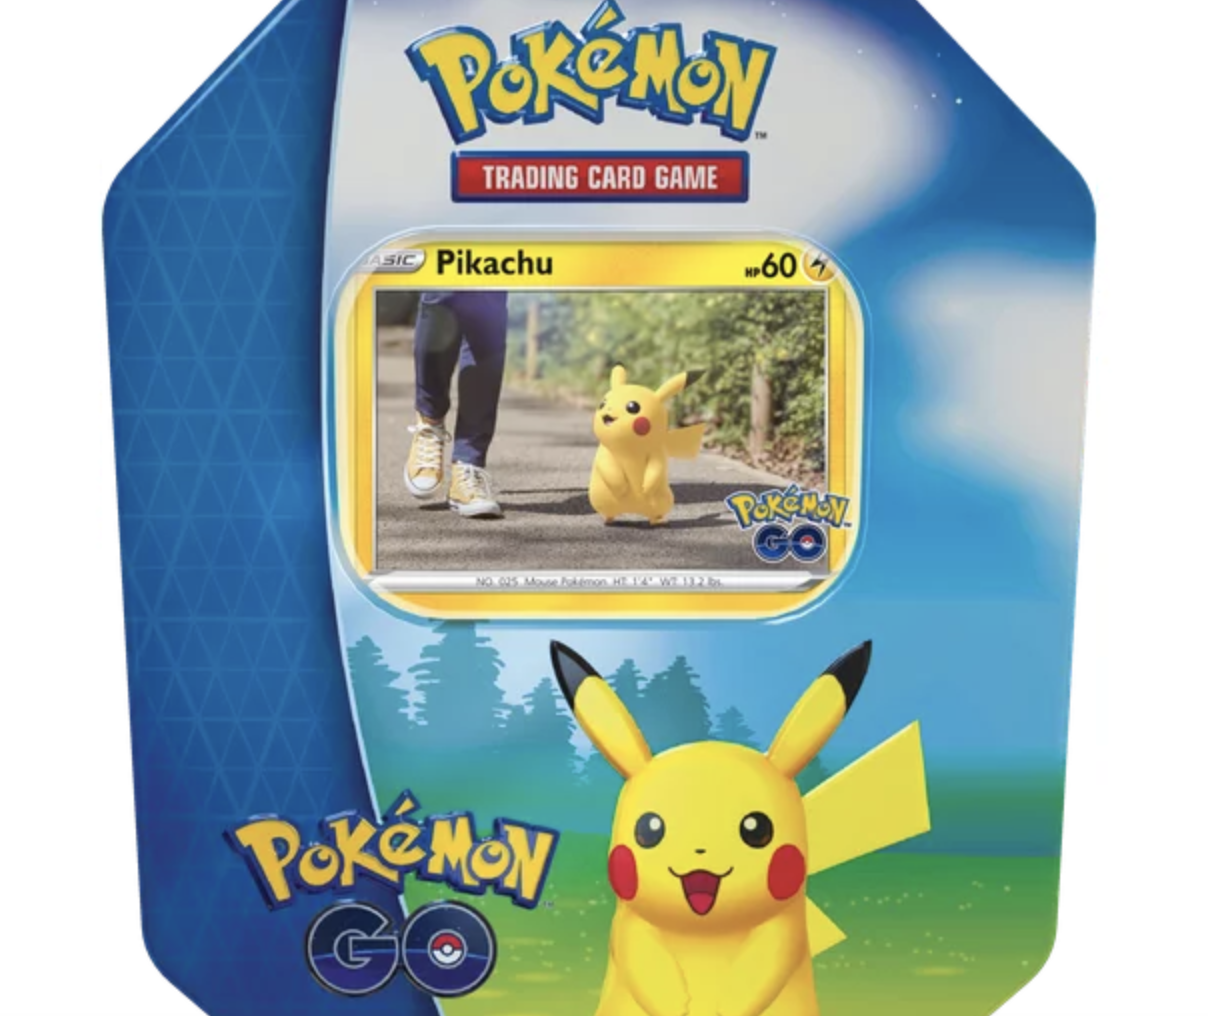  Northwest 11 Cloud Pillow, 1 Count (Pack of 1), Pokemon  Pokeball : Sports & Outdoors